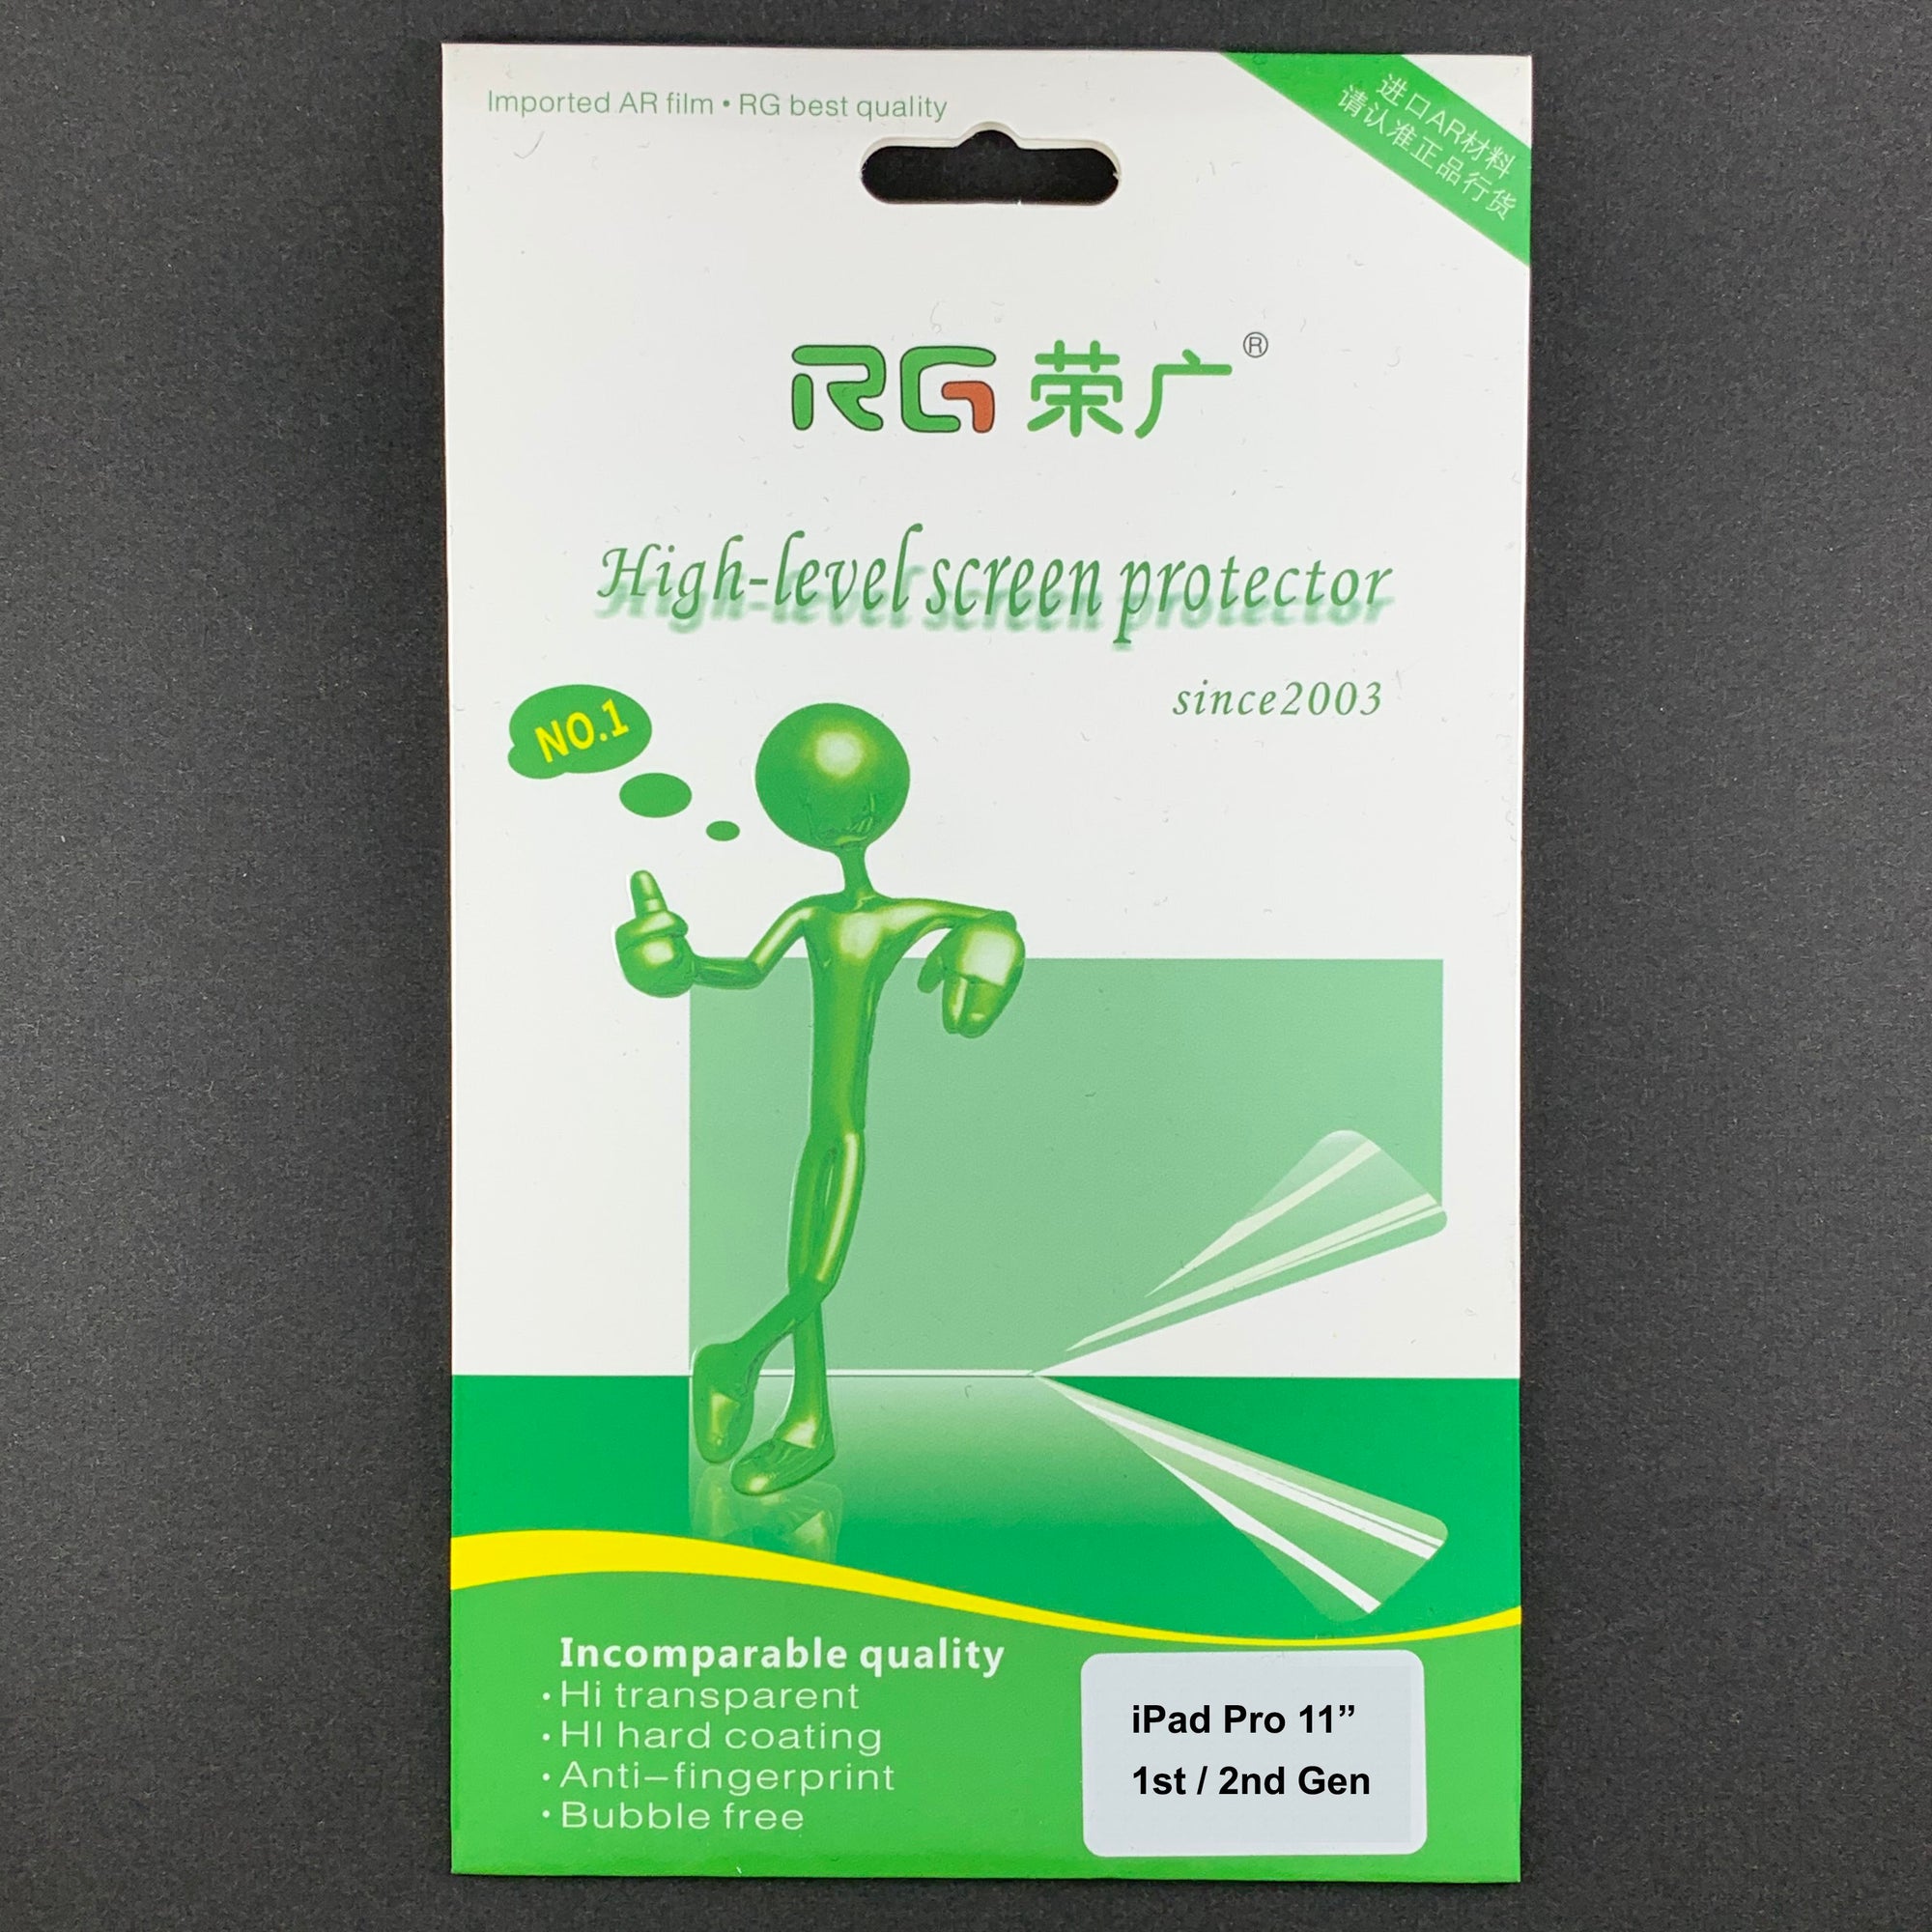 RG Professional Soft Film Screen Protector for iPad Pro 11" 1st / 2nd Gen (MATTE, 2-PACK)